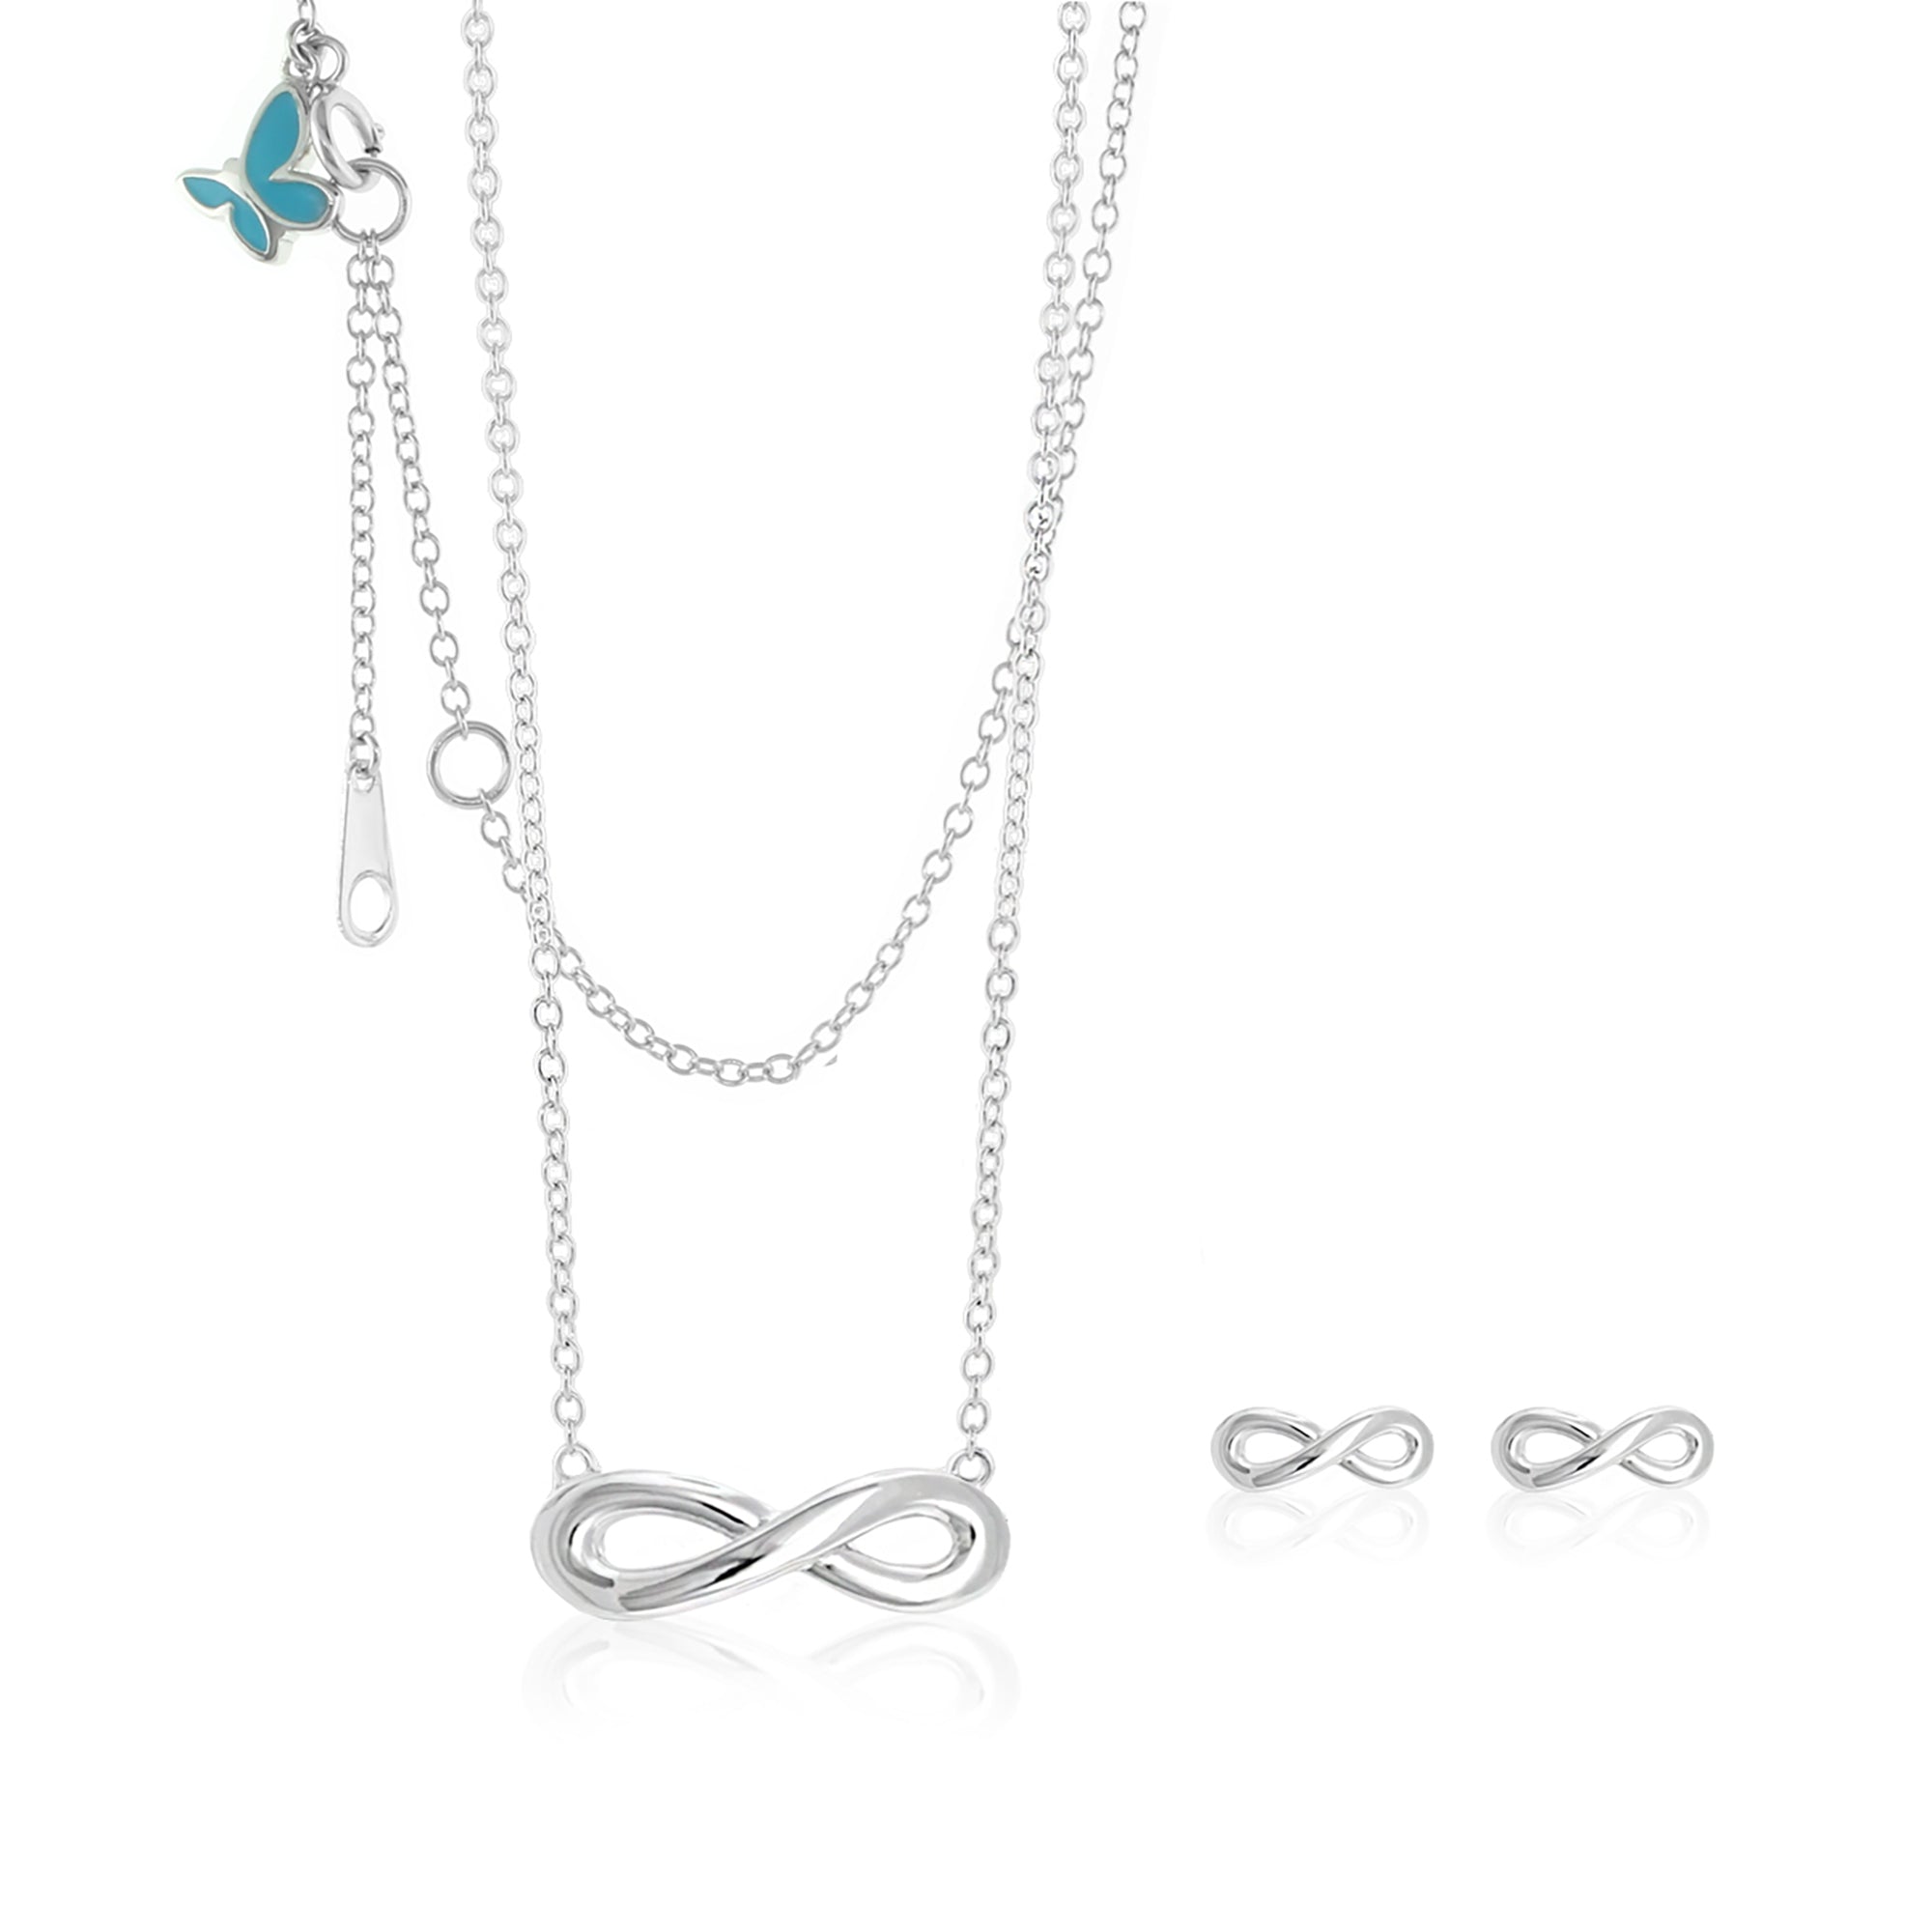 Sydney Leigh Infinity Necklace & Earrings Set